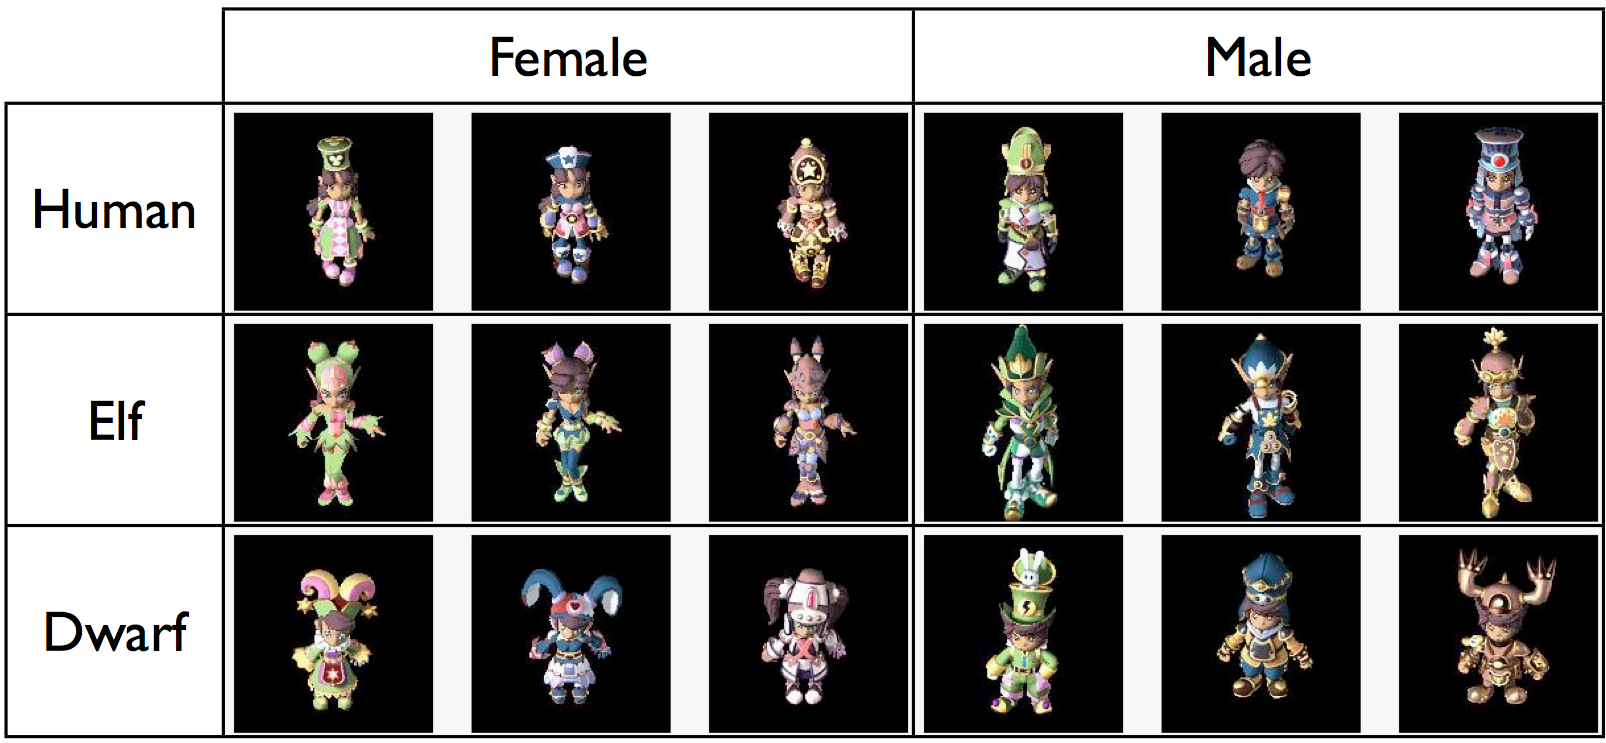 Male to female transformation games